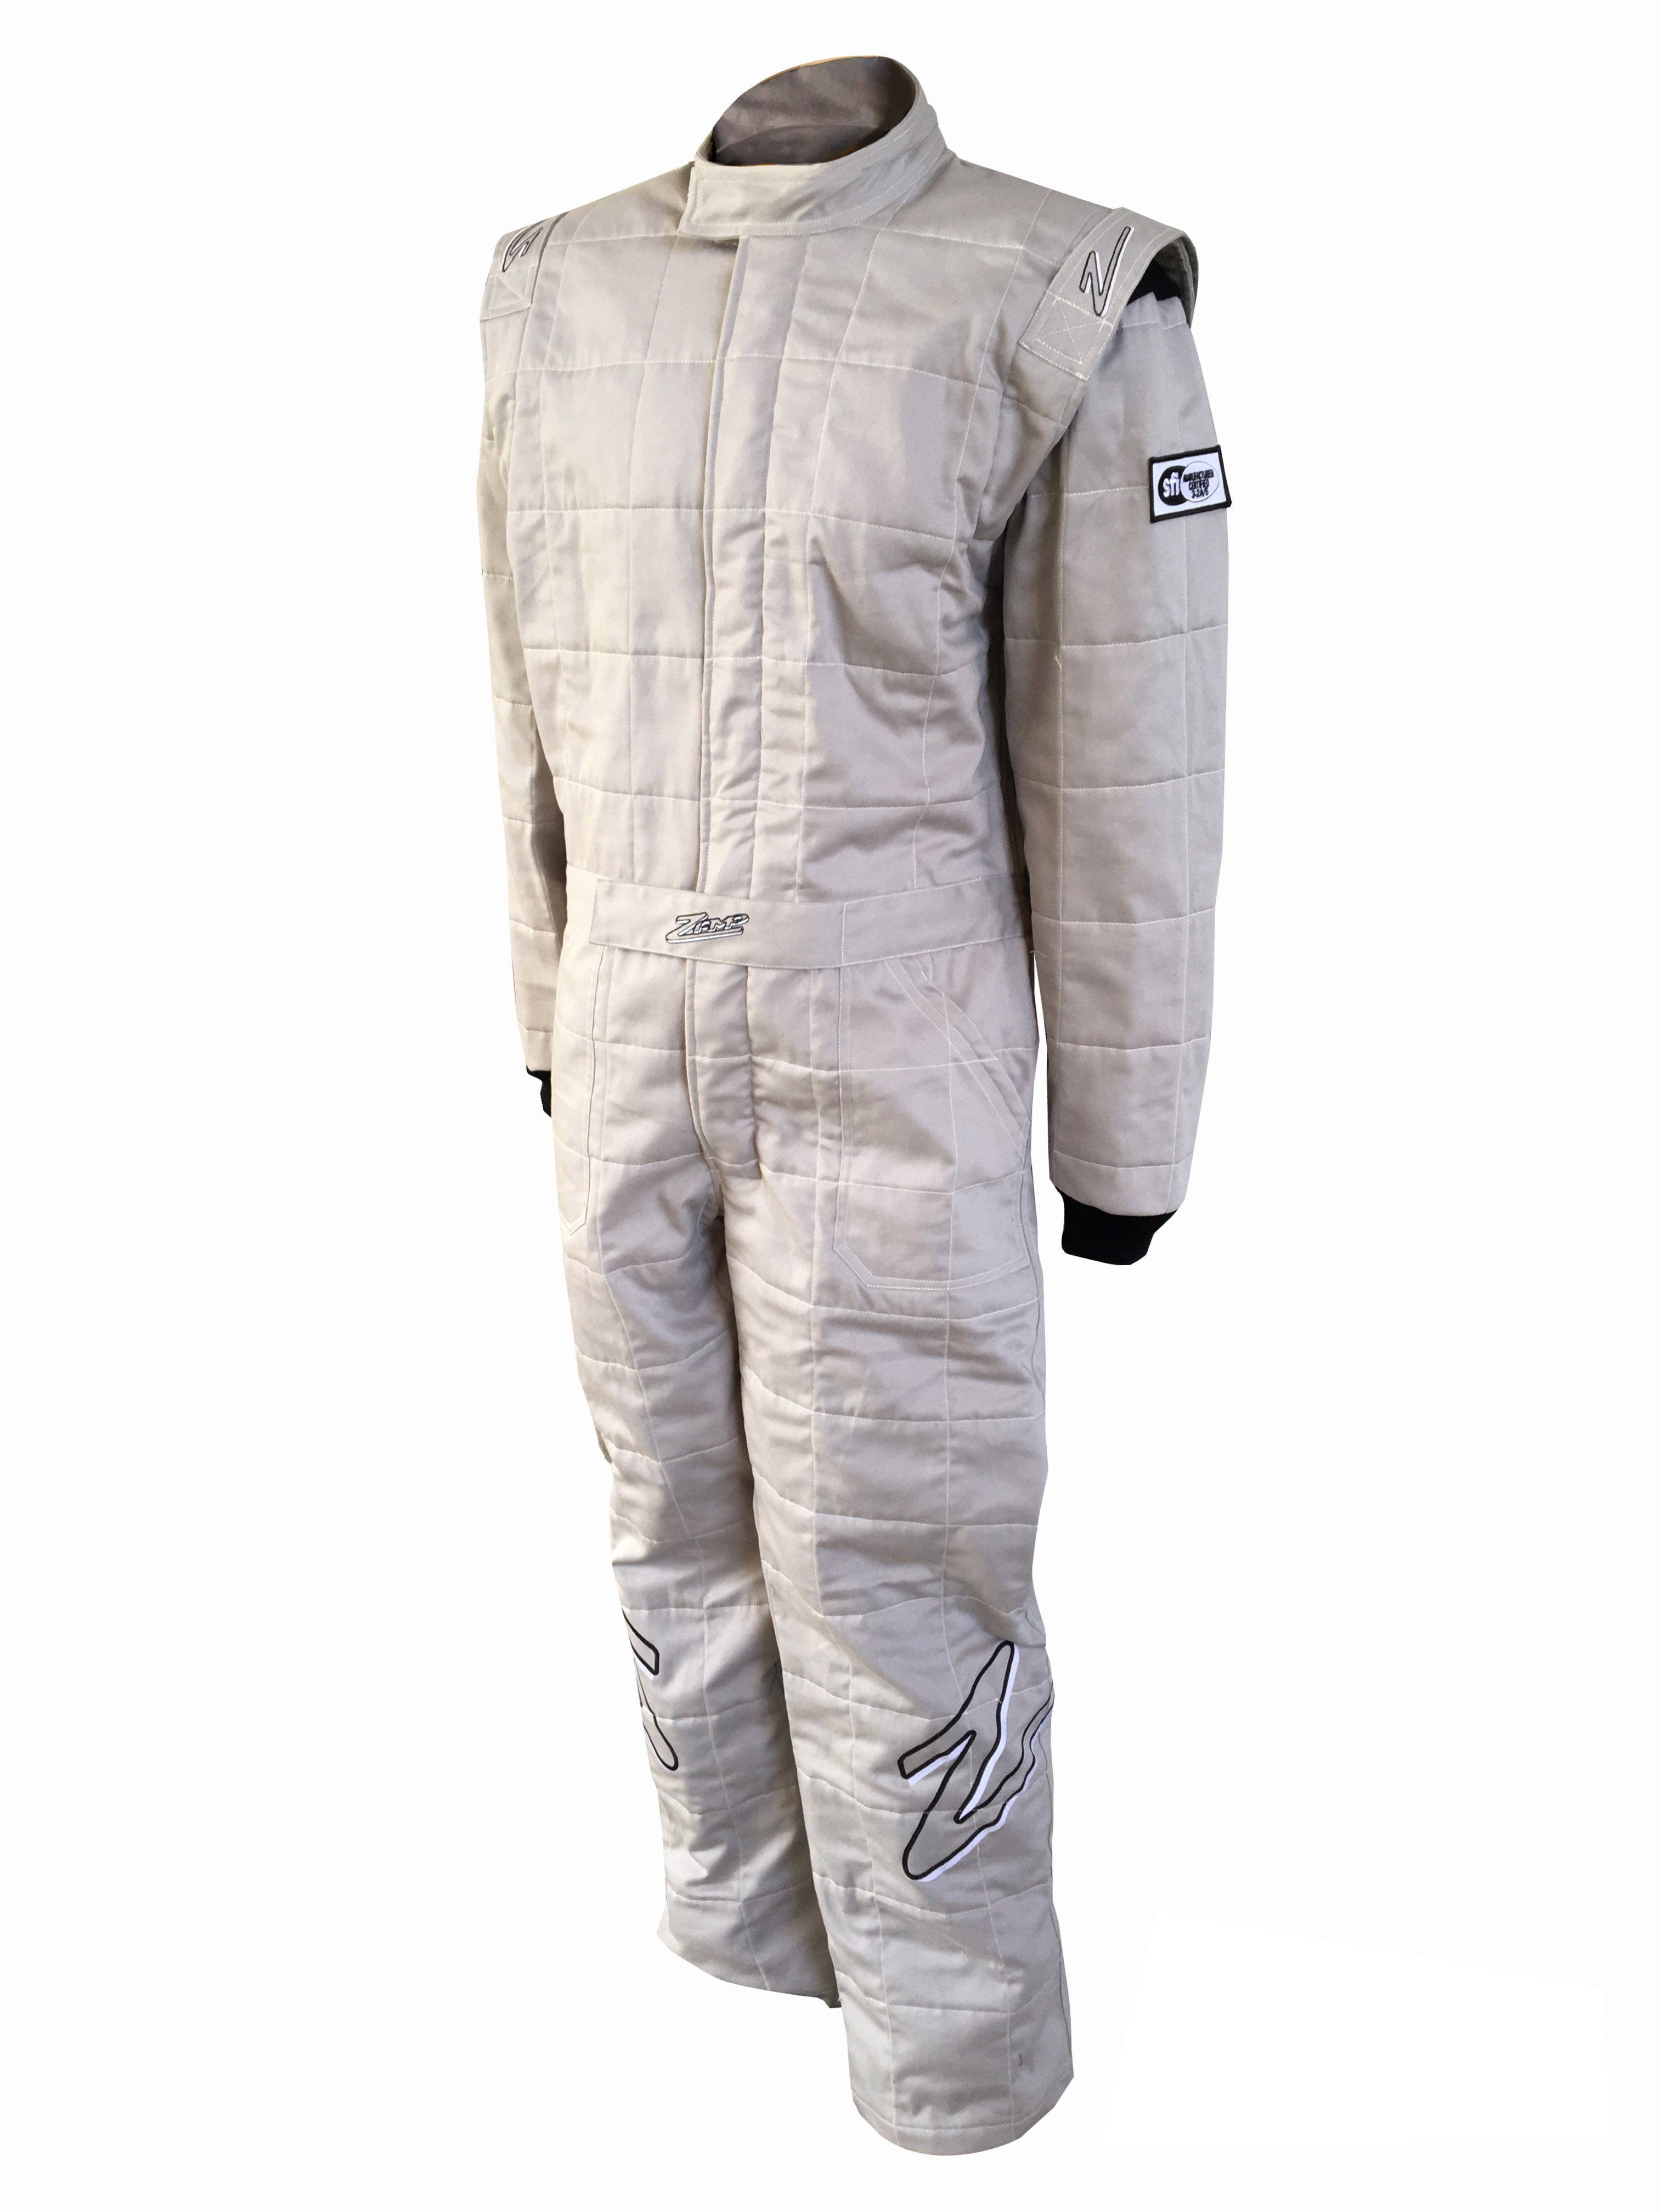 Zamp Solar Suit ZR-30 3 Layer X-Large Gray SFI 3.2A/5 Safety Clothing Driving Suits main image